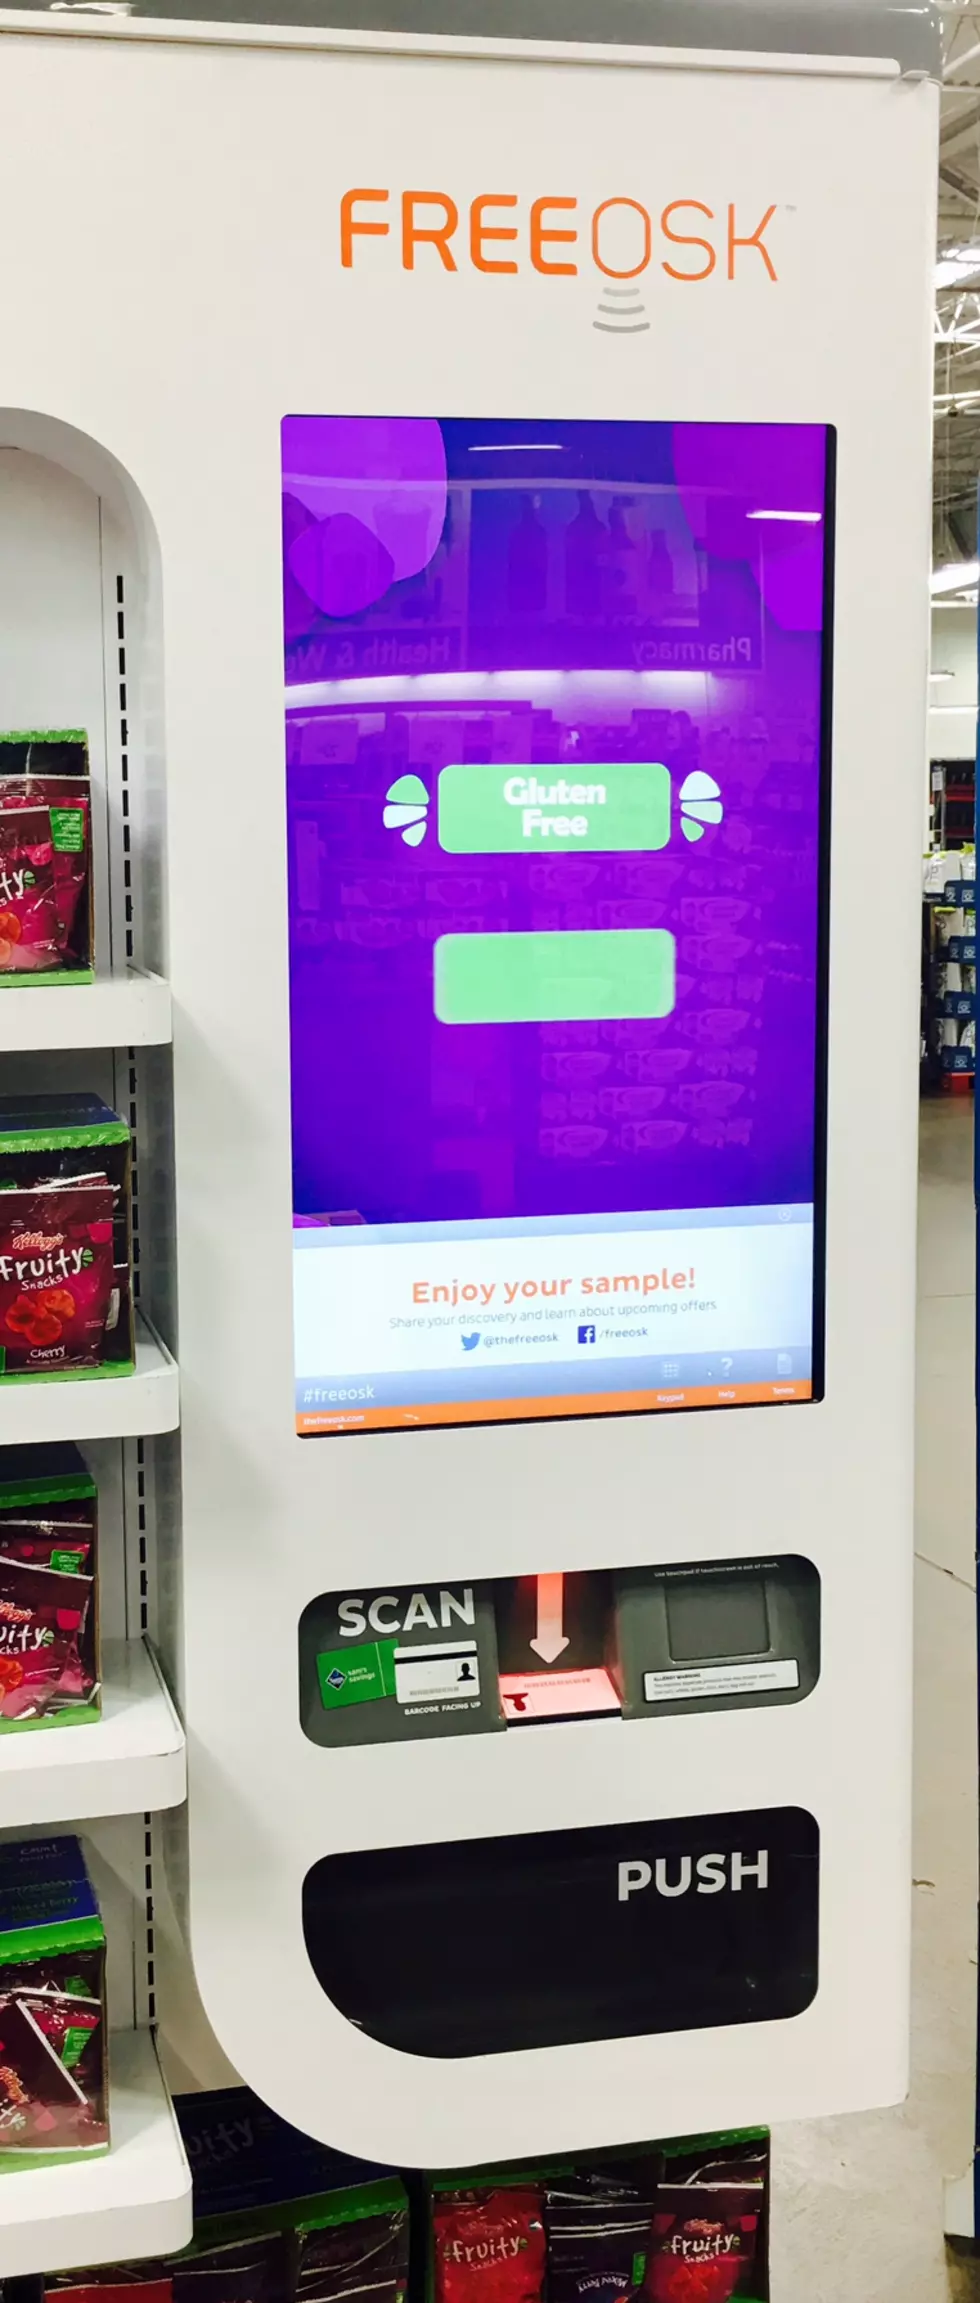 Sam’s Club in Evansville Has a FREEOSK – The Future of Sampling